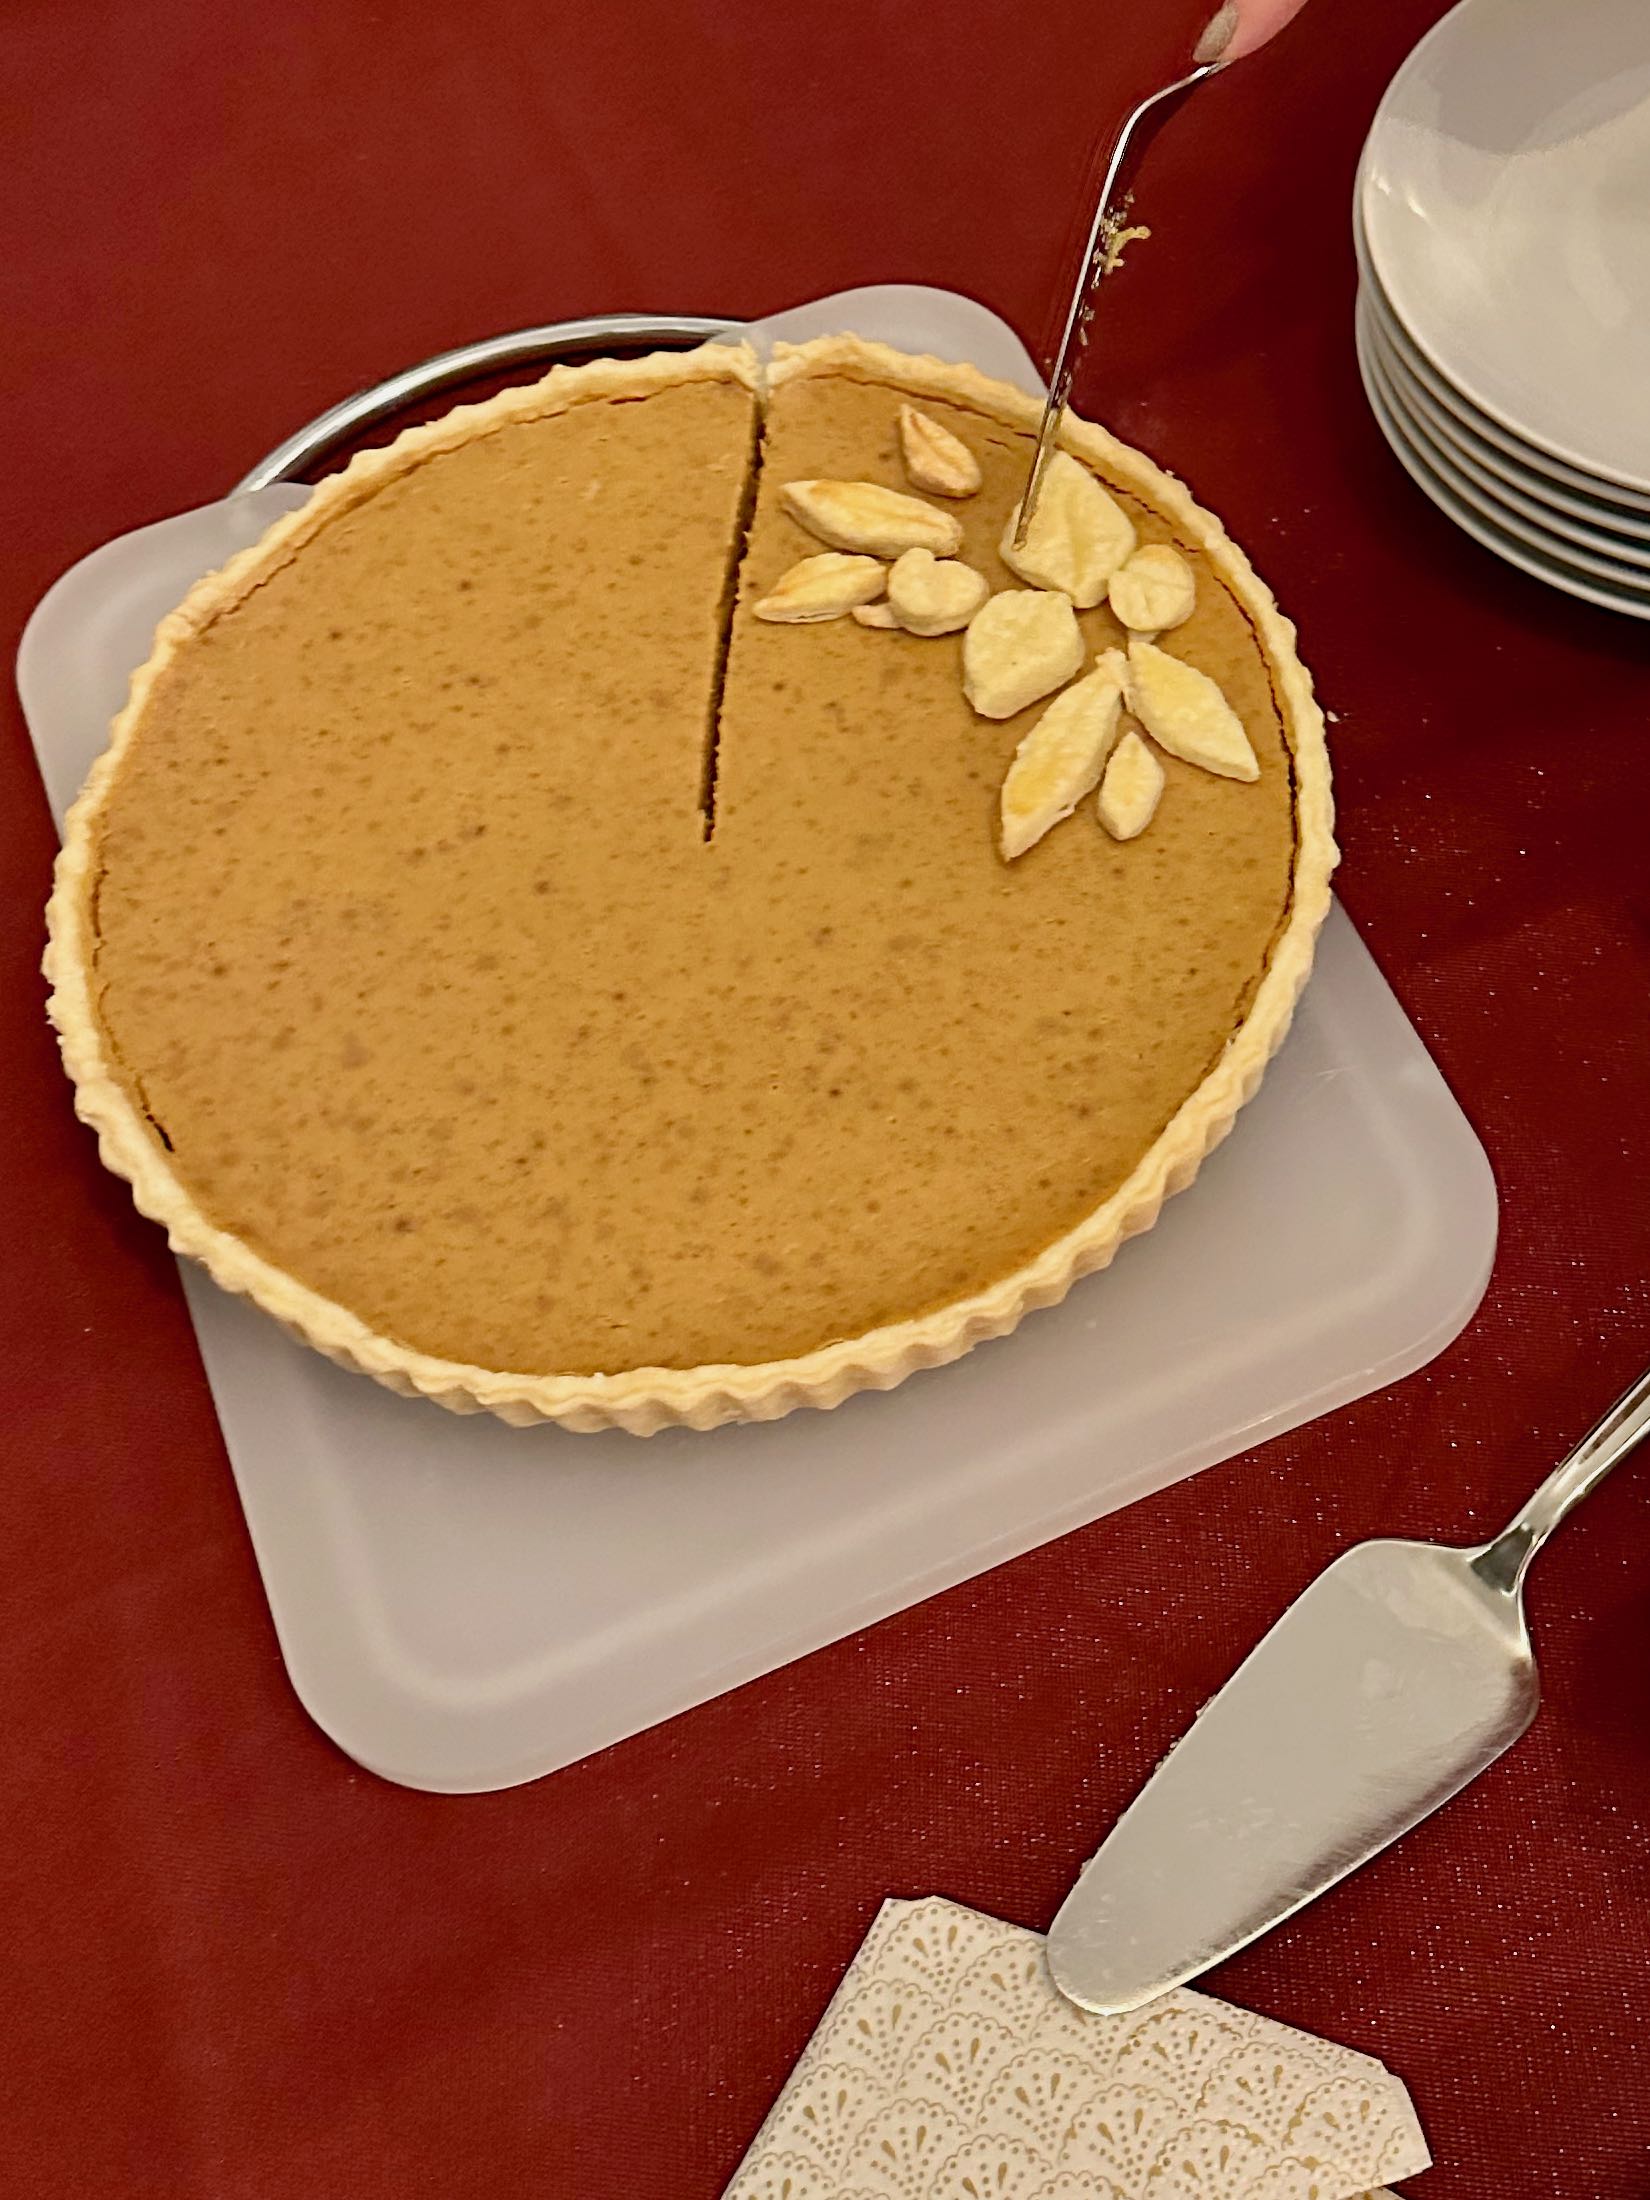 U.S. Thanksgiving Traditions That Might Seem Strange to French People